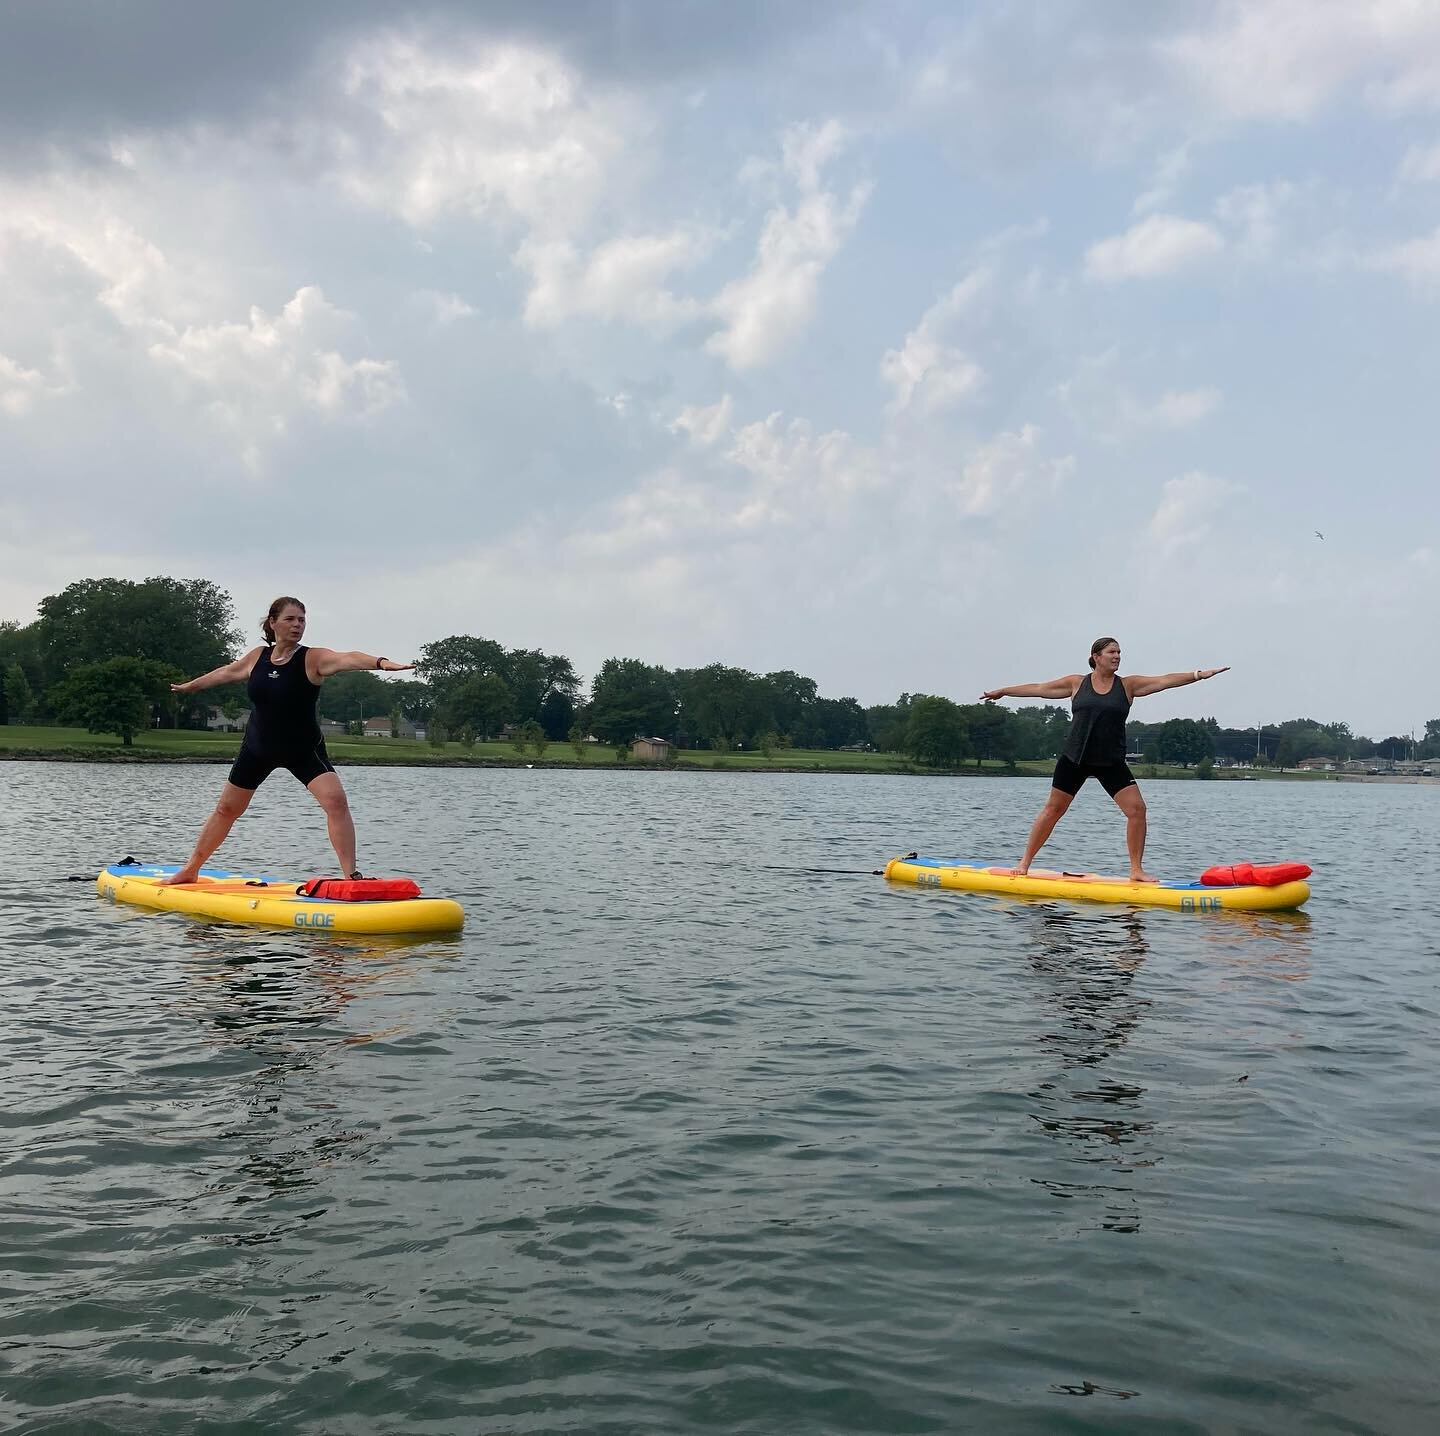 New warriors mastering the floating yoga studio! First time SUP yogis did amazing their first time out. 🏄🏾&zwj;♀️🧘🏽&zwj;♀️

Grab a friend or two and book a private Starr SUP Yoga session now or register for Saturday classes at 10:30am

Check the 